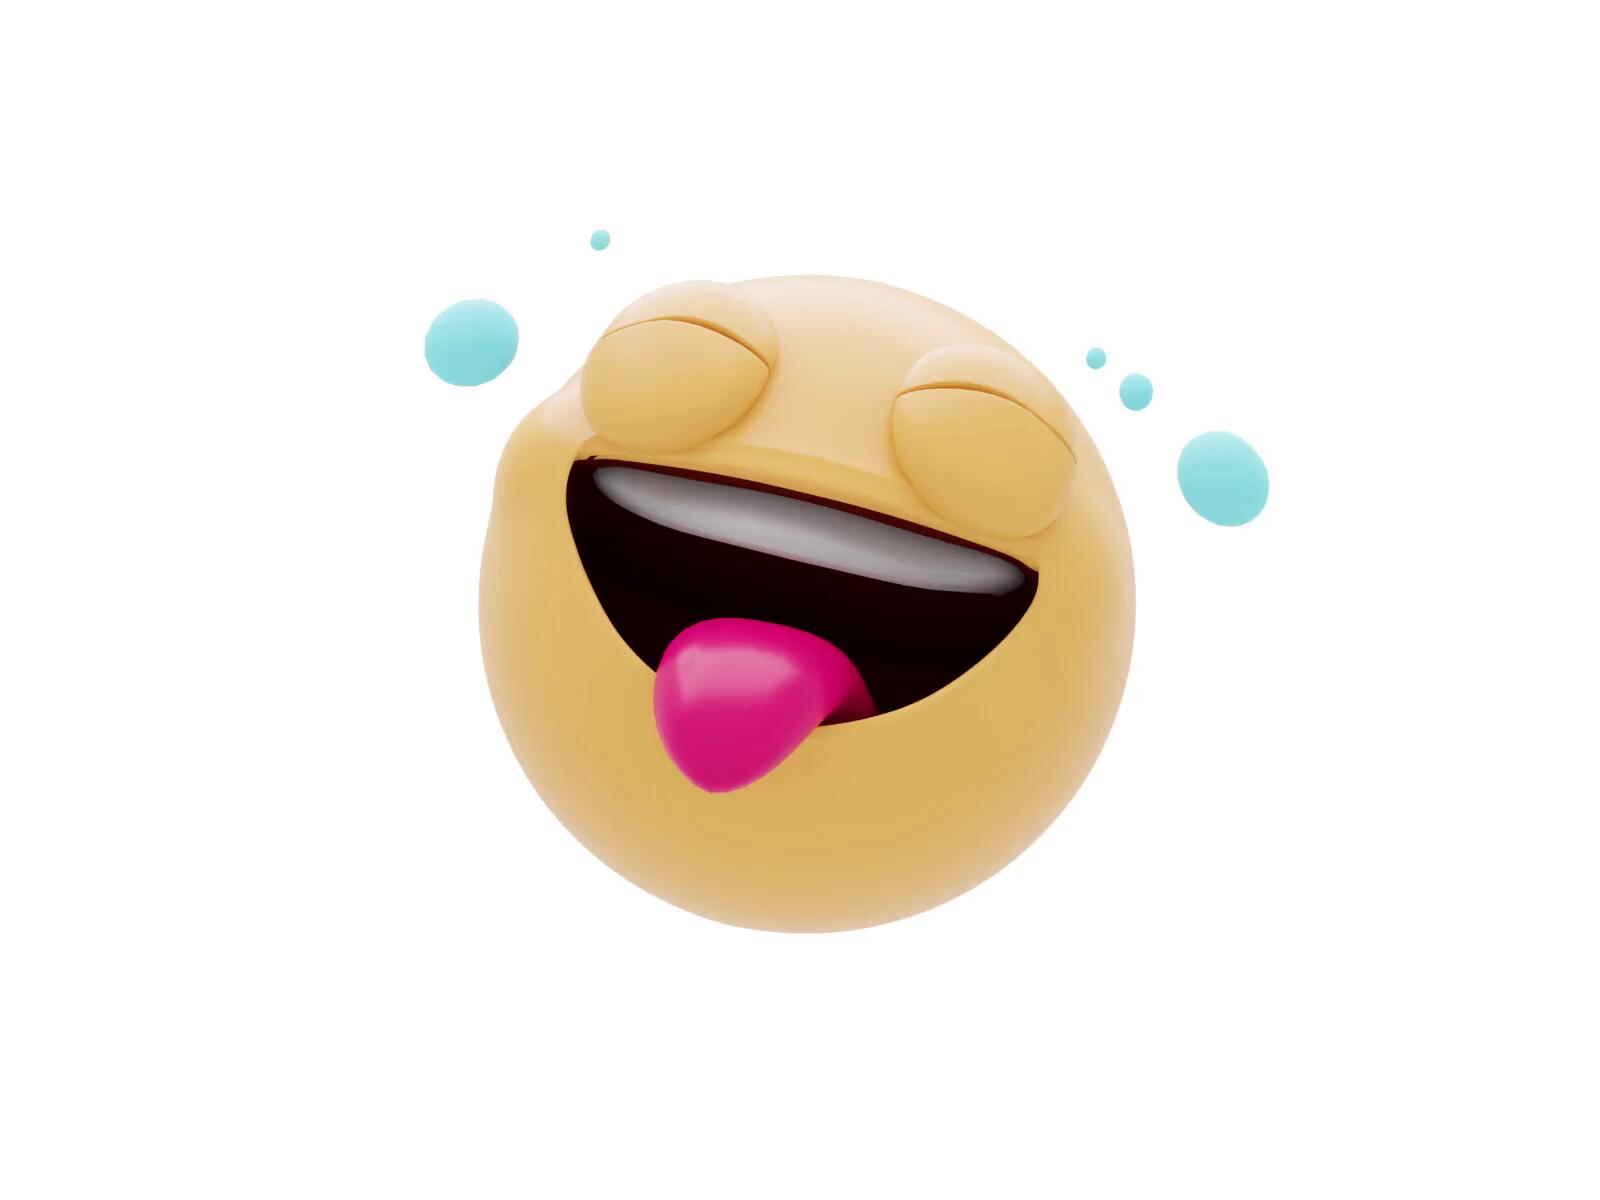 animated smiley emoticons